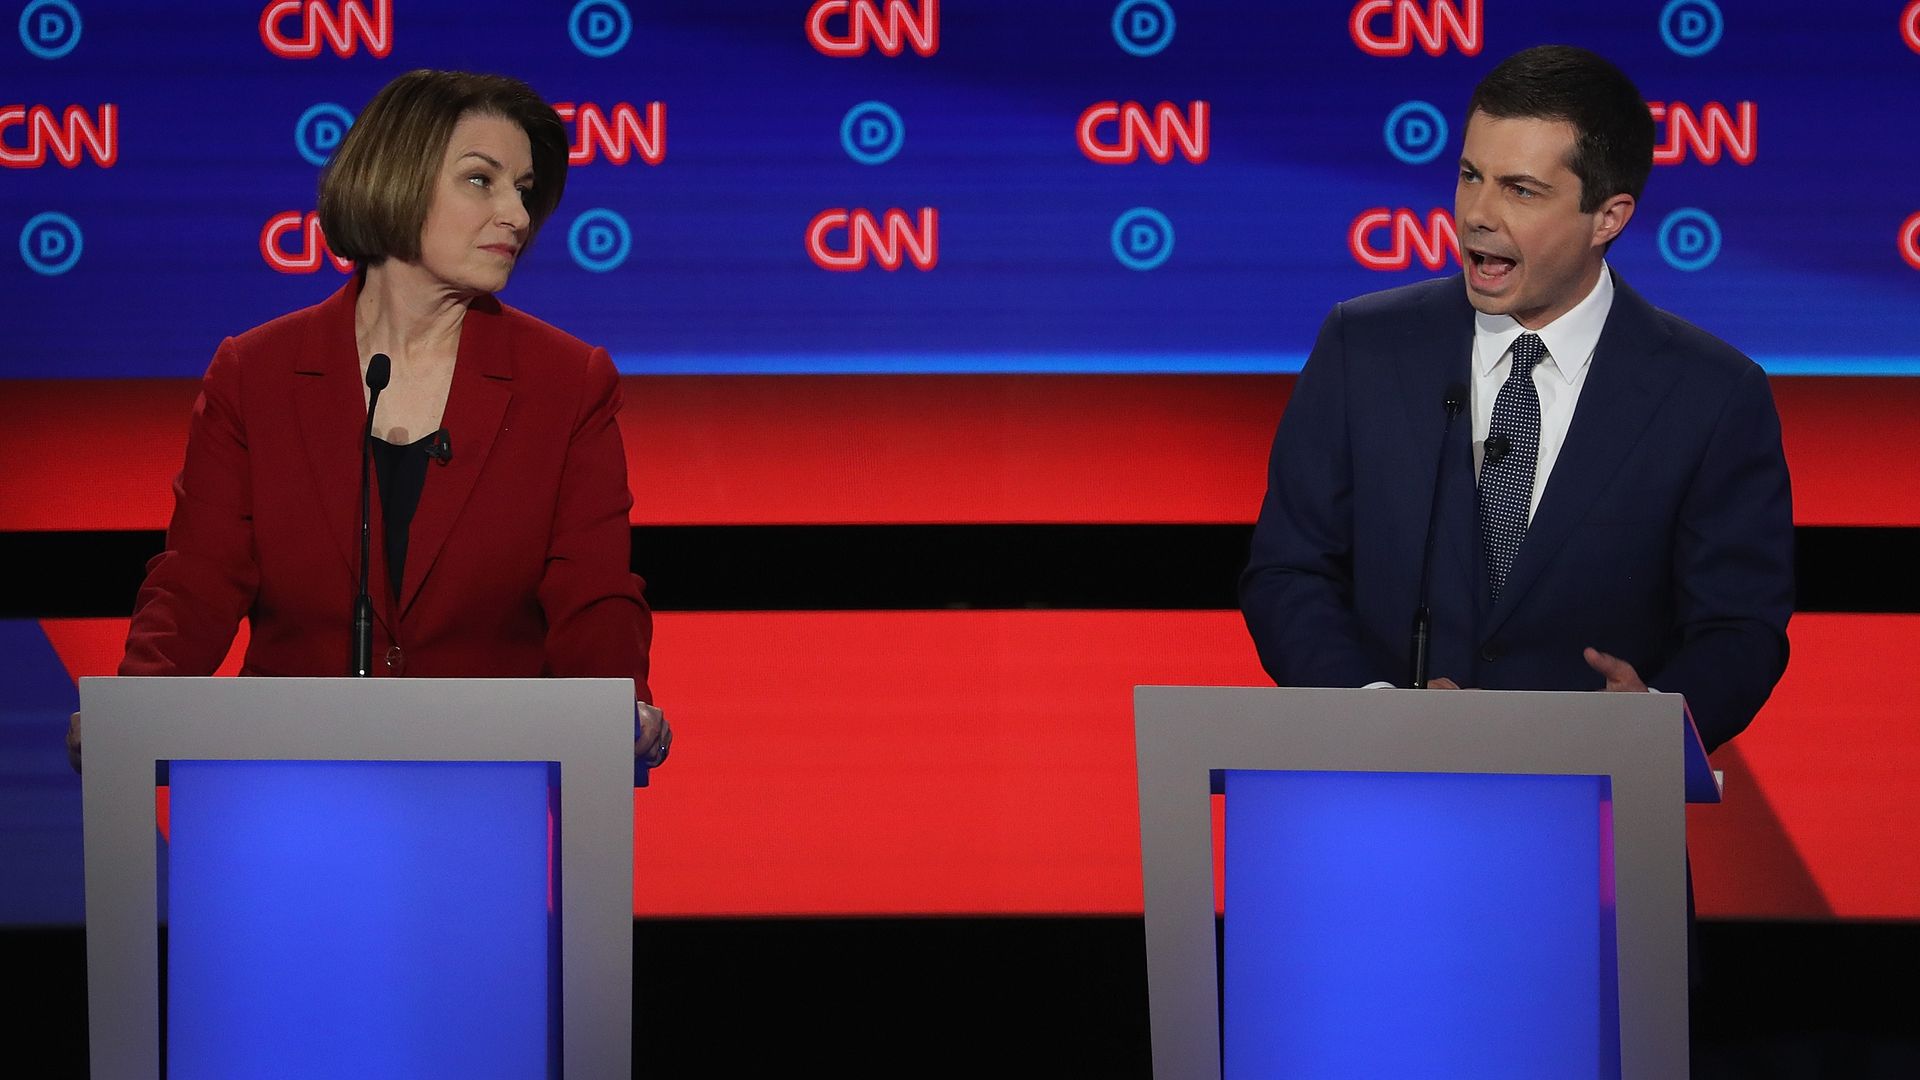 In this image, Klobuchar and Pete Buttigieg speak behind two different podiums on stage with the CNN logo behind them.